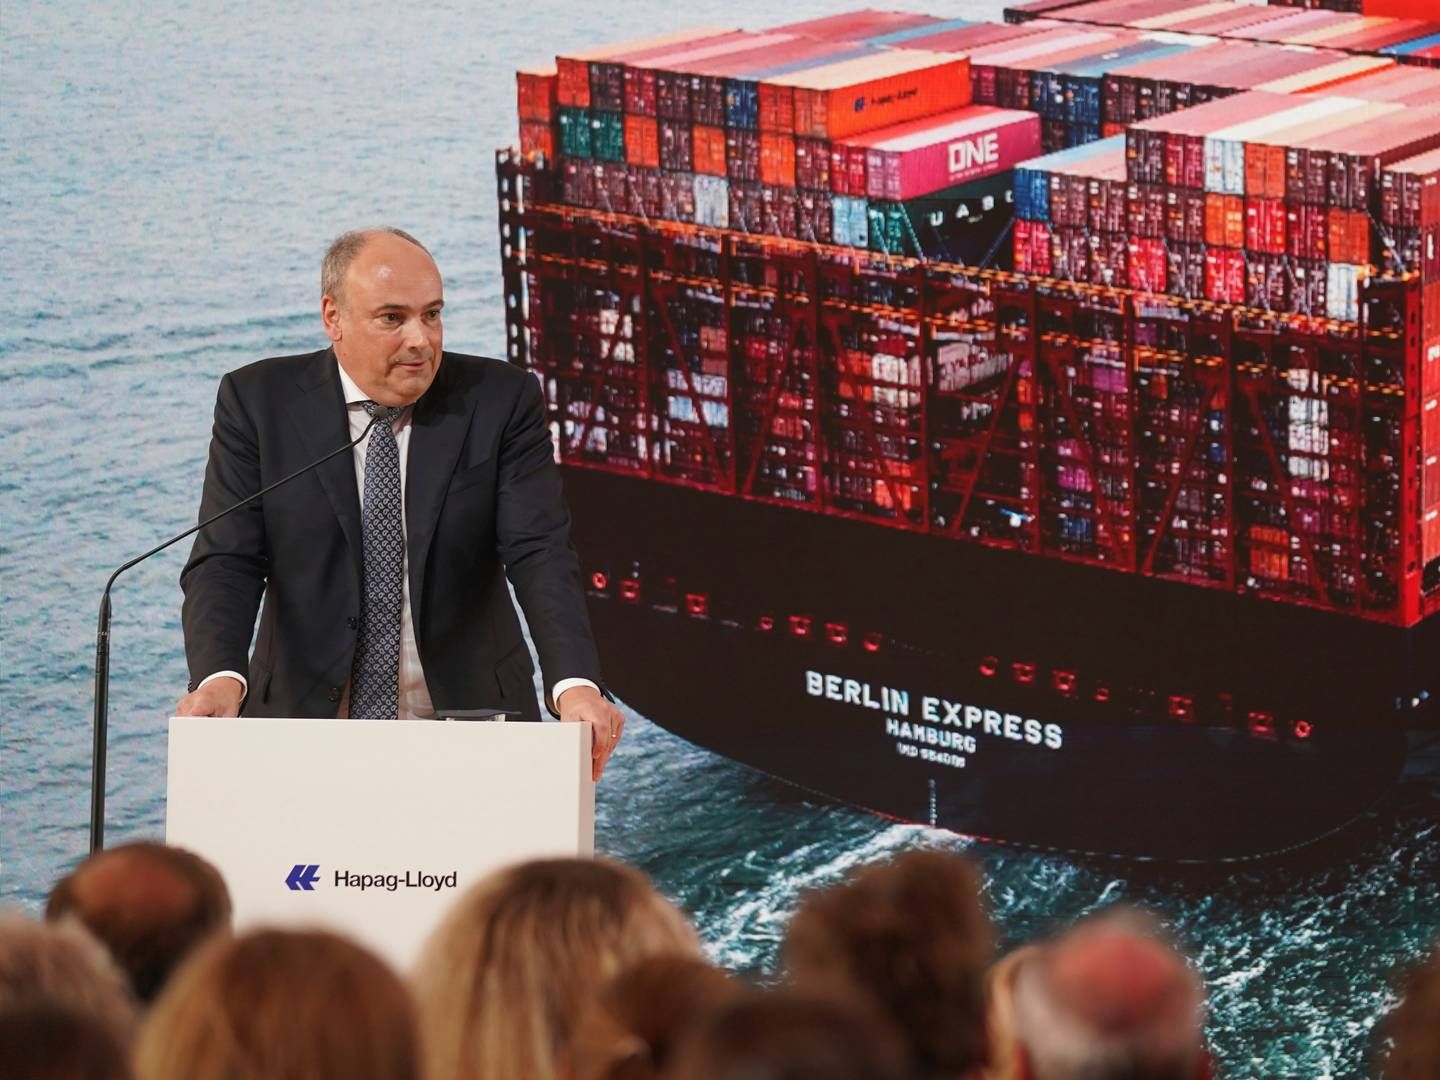 "We might have a slightly earlier peak season because of the longer transit times that we're seeing at the moment and with all the uncertainty, people might try to get cargo a bit earlier," says Hapag-Lloyd CEO Rolf Habben Jansen. | Photo: Marcus Brandt/AP/Ritzau Scanpix